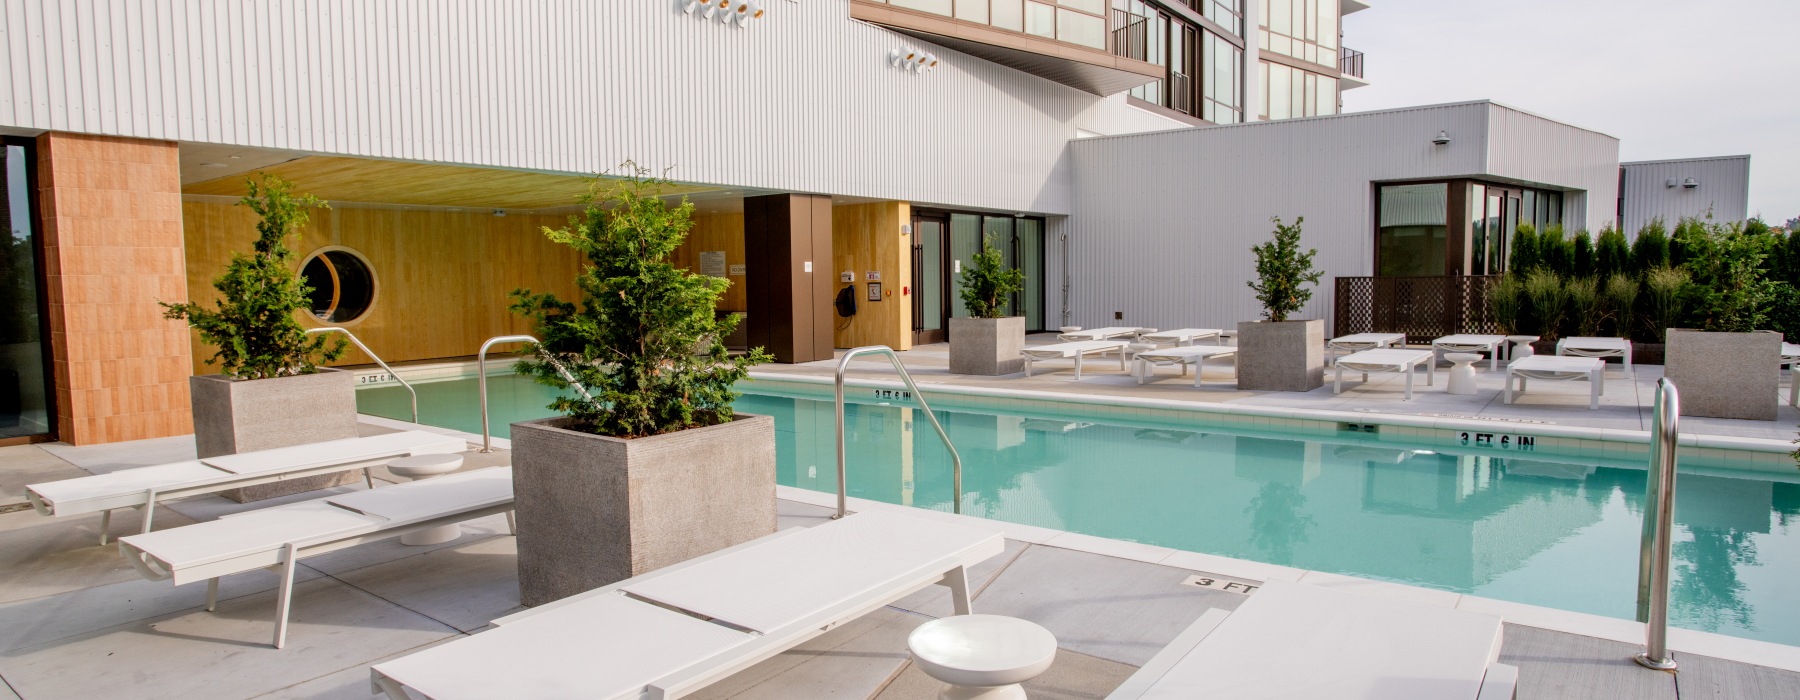 Signal House's community pool with ample seating